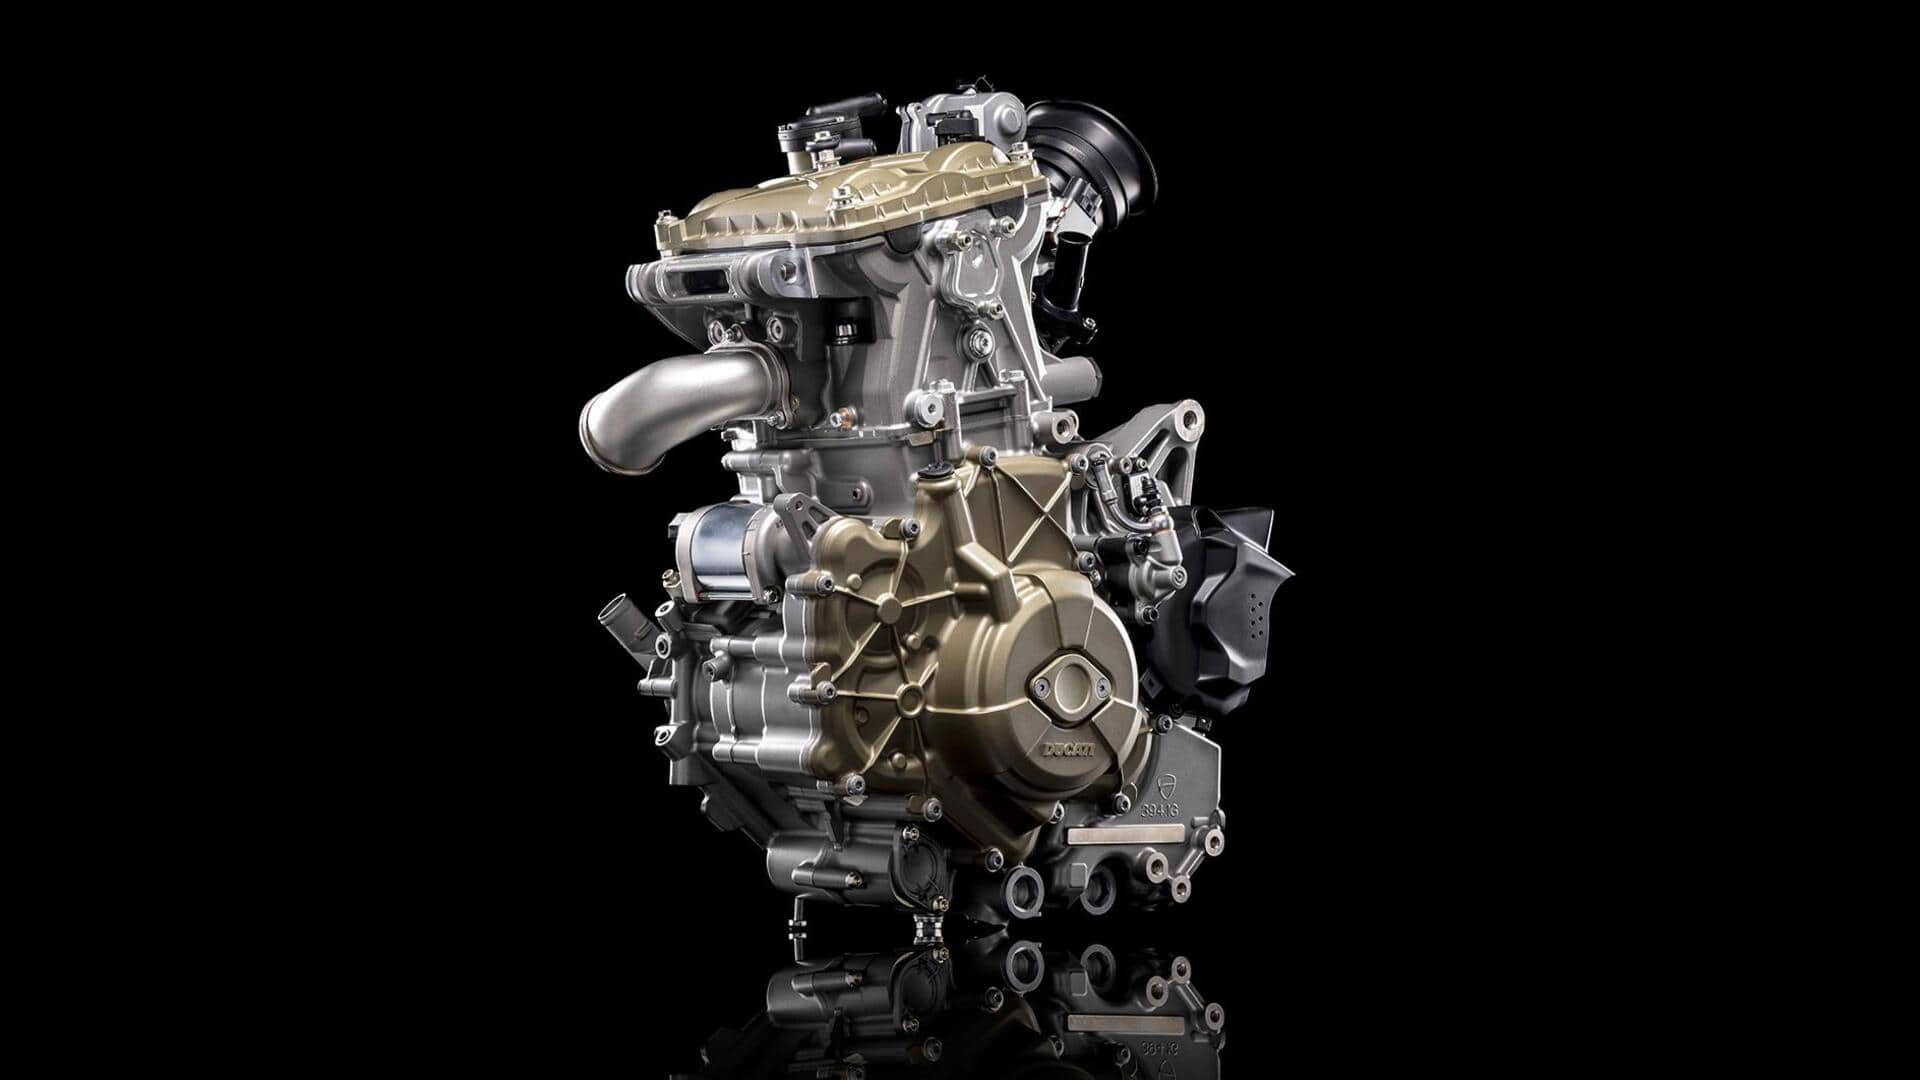 Ducati to debut its most powerful single-cylinder engine in November